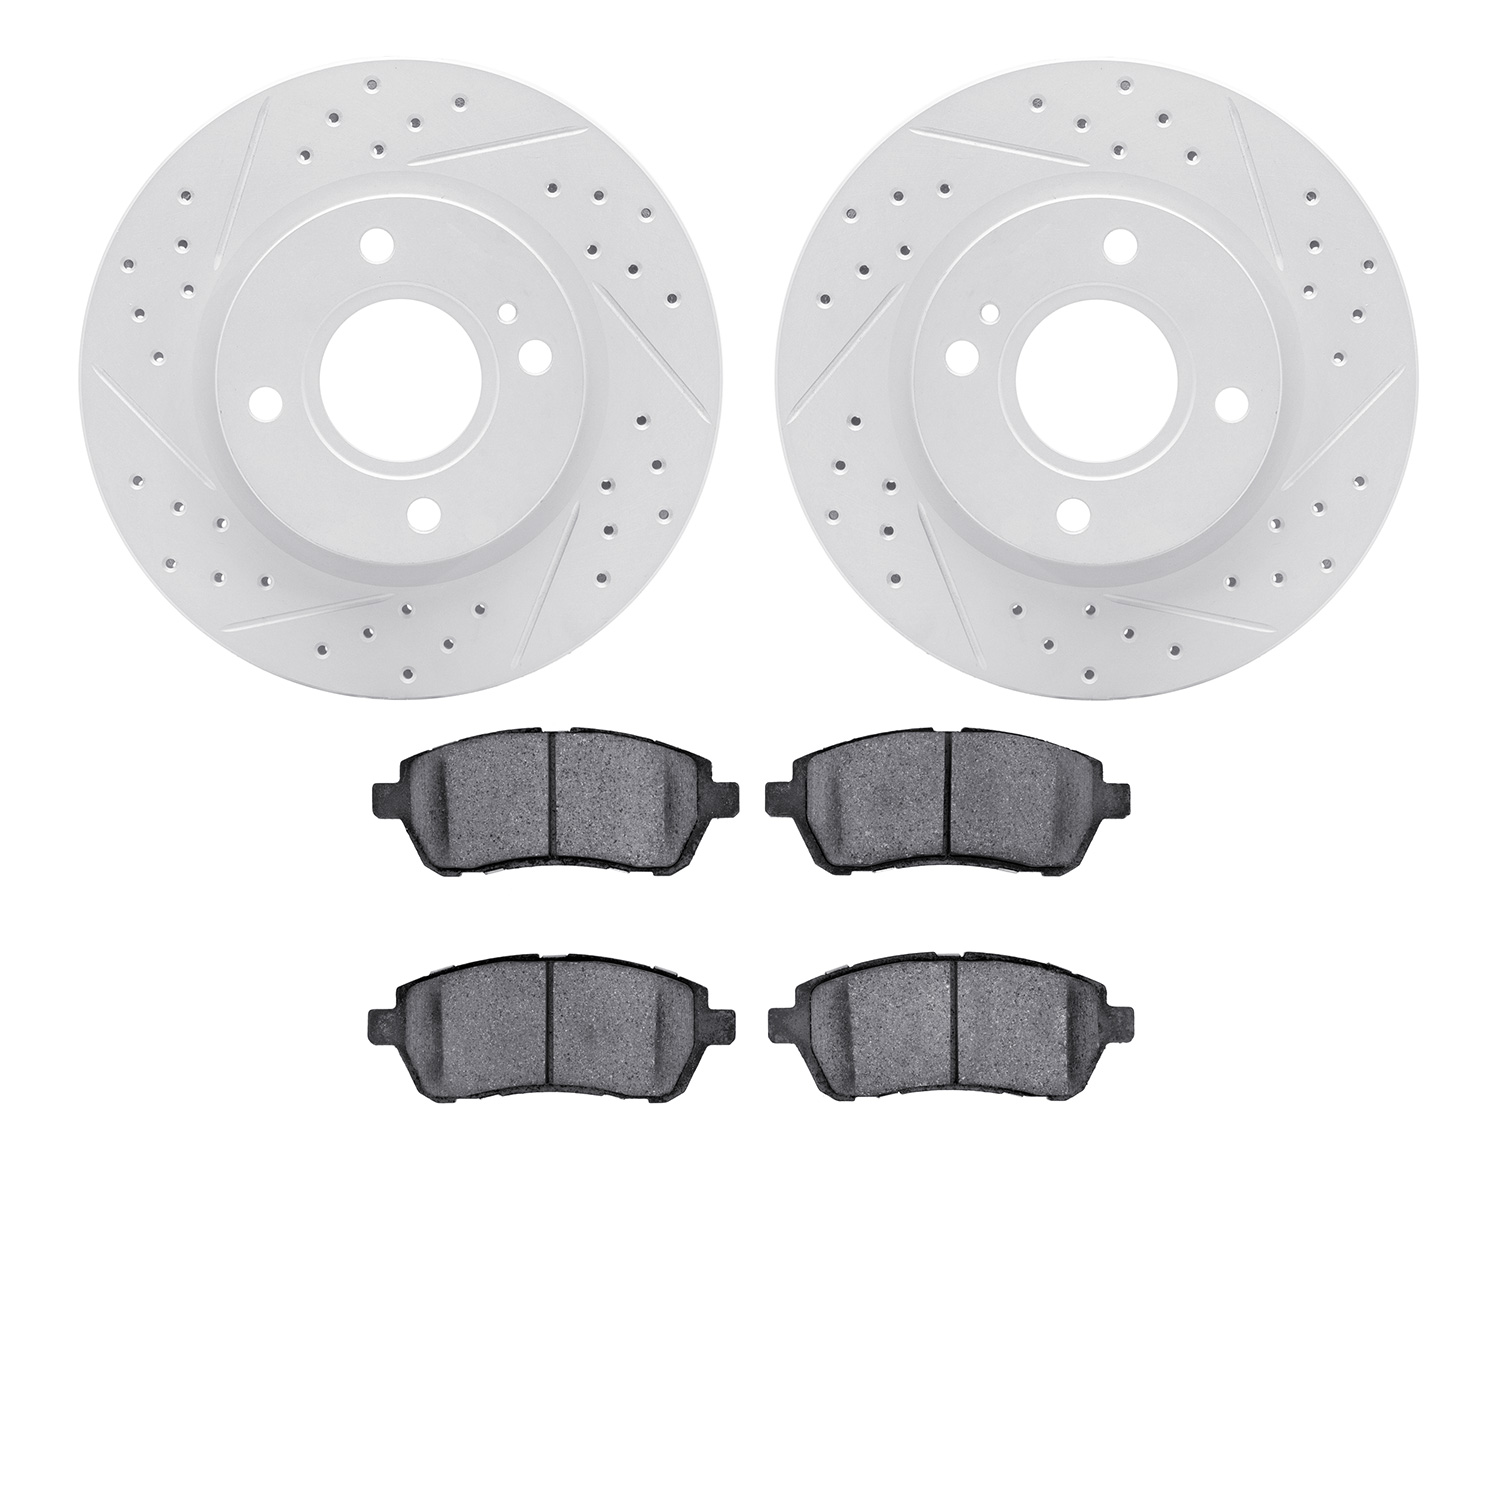 2502-54057 Geoperformance Drilled/Slotted Rotors w/5000 Advanced Brake Pads Kit, 2011-2019 Ford/Lincoln/Mercury/Mazda, Position: